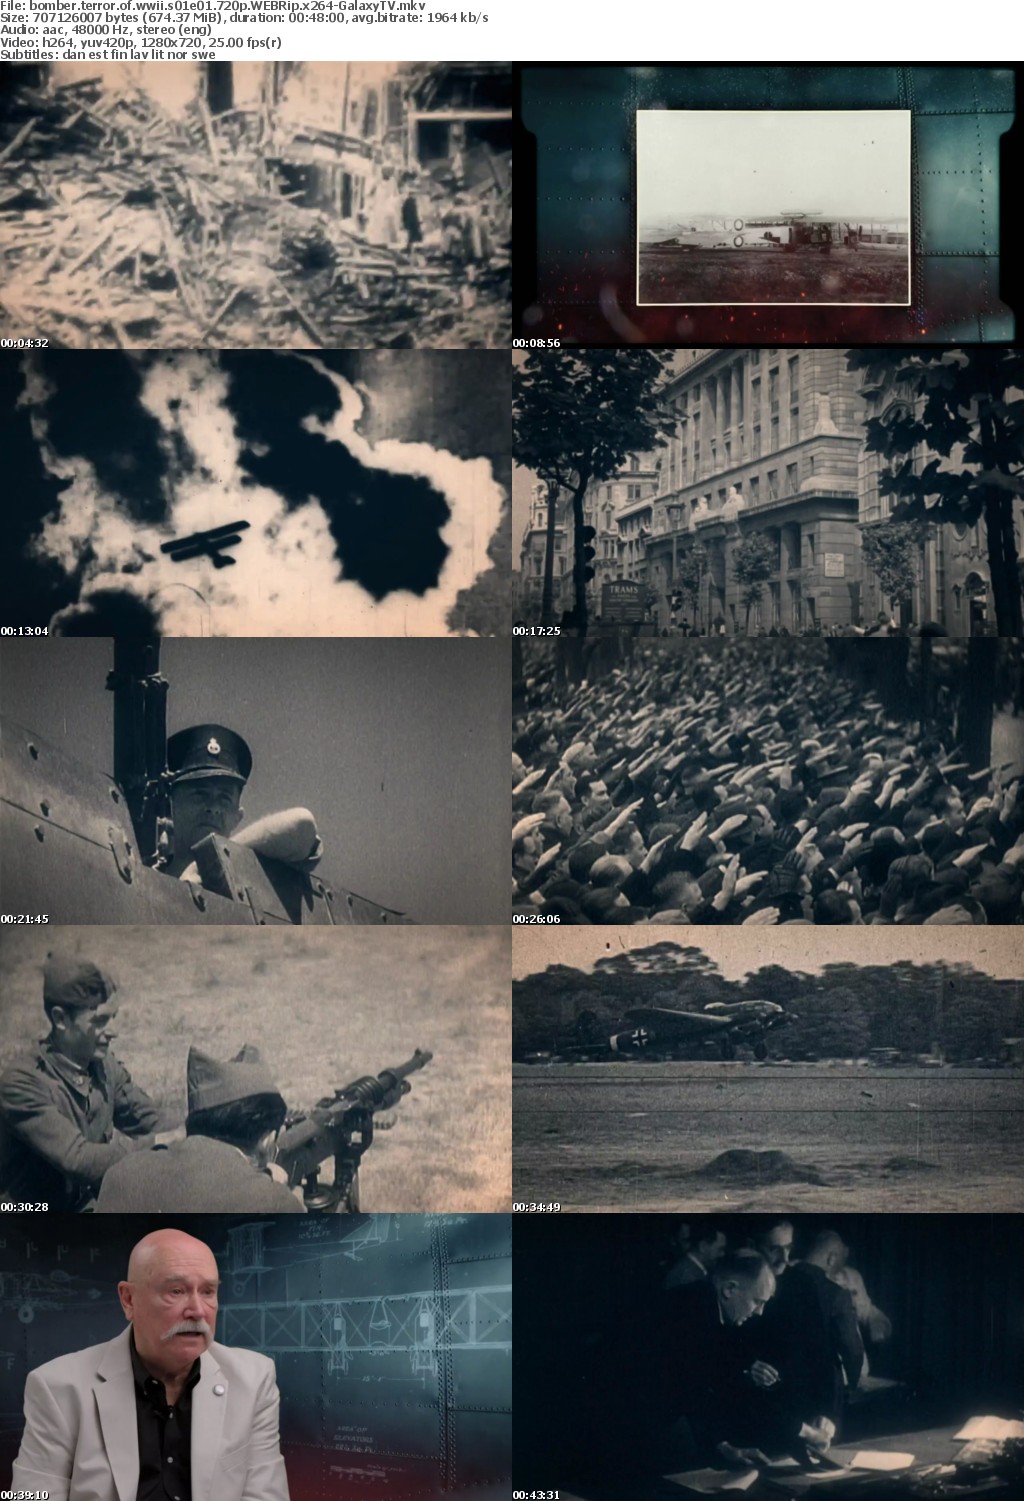 Bomber Terror of WWII S01 COMPLETE 720p WEBRip x264-GalaxyTV